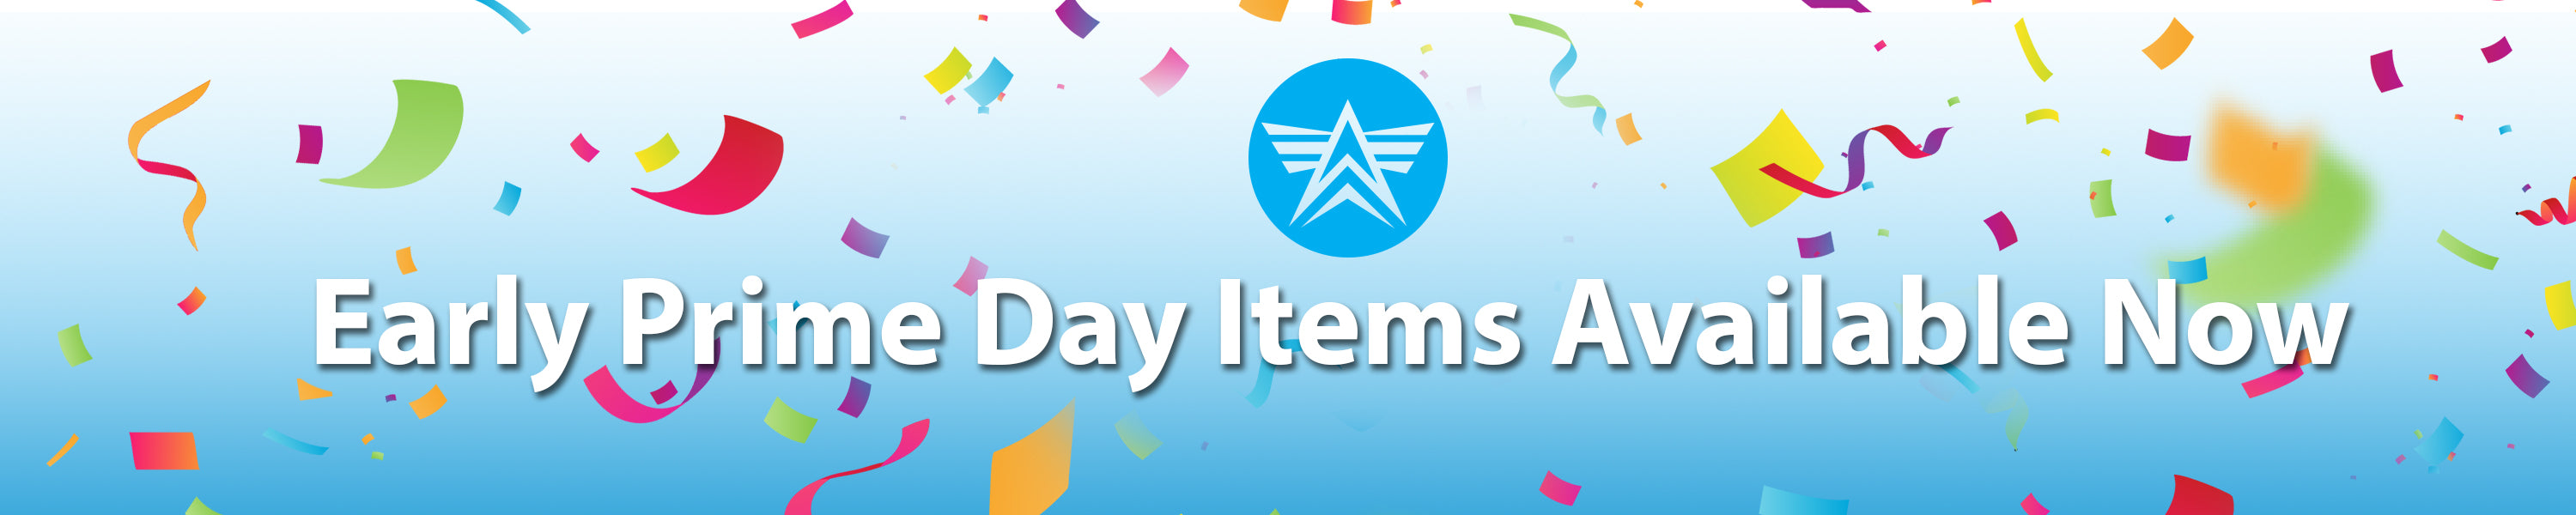 collections/Prime_Day_header_-_altair.jpg